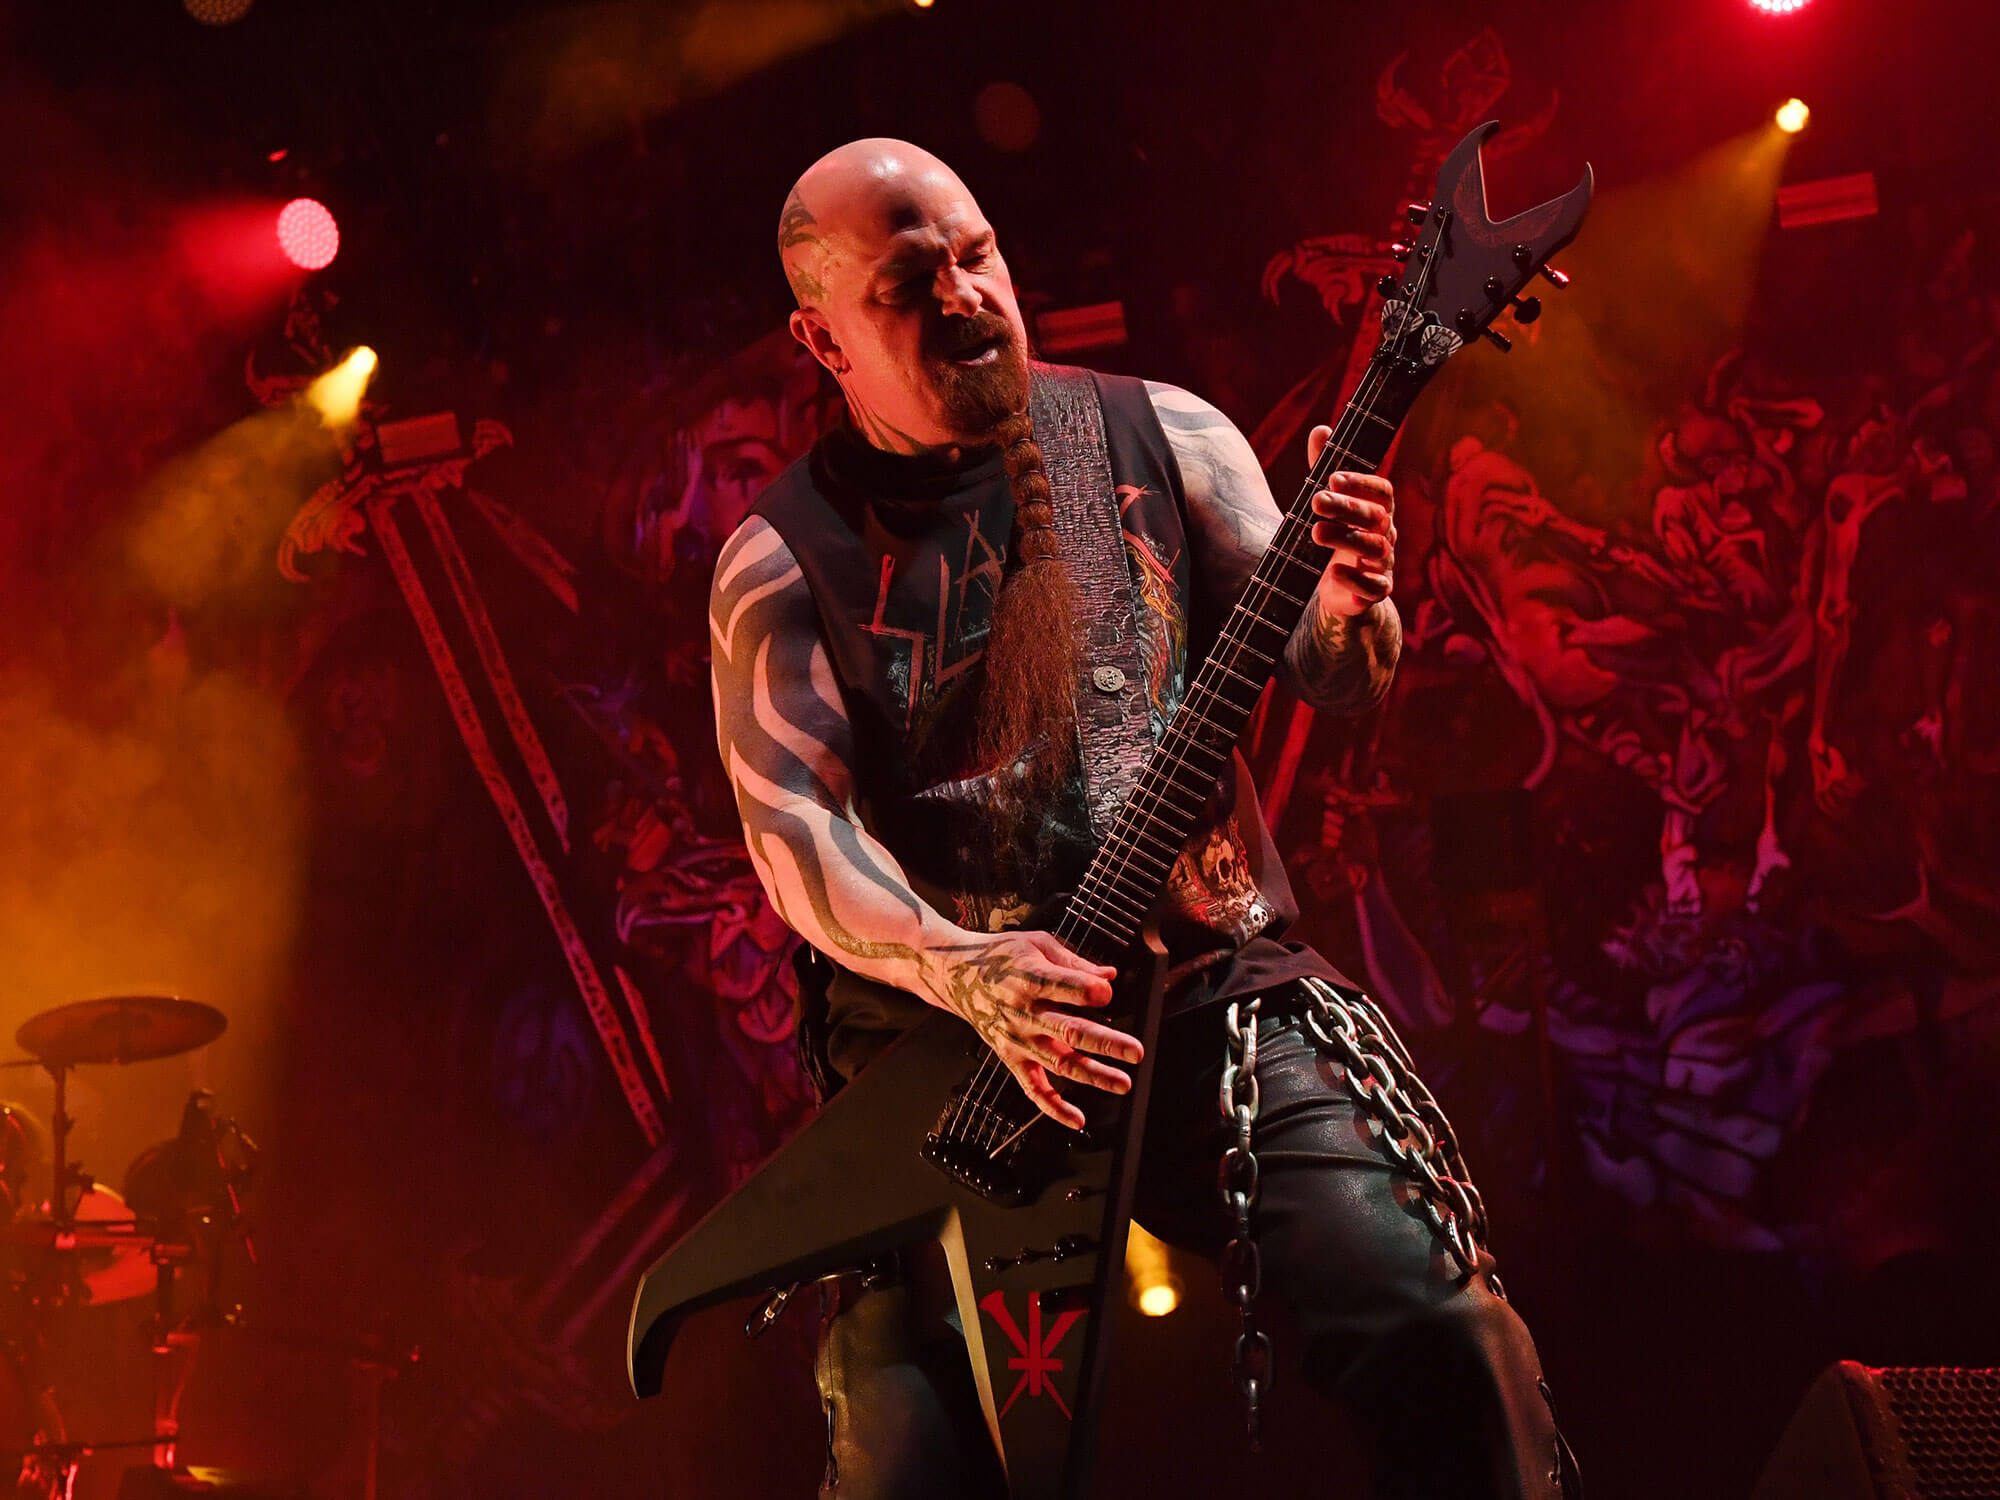 Kerry King performing live